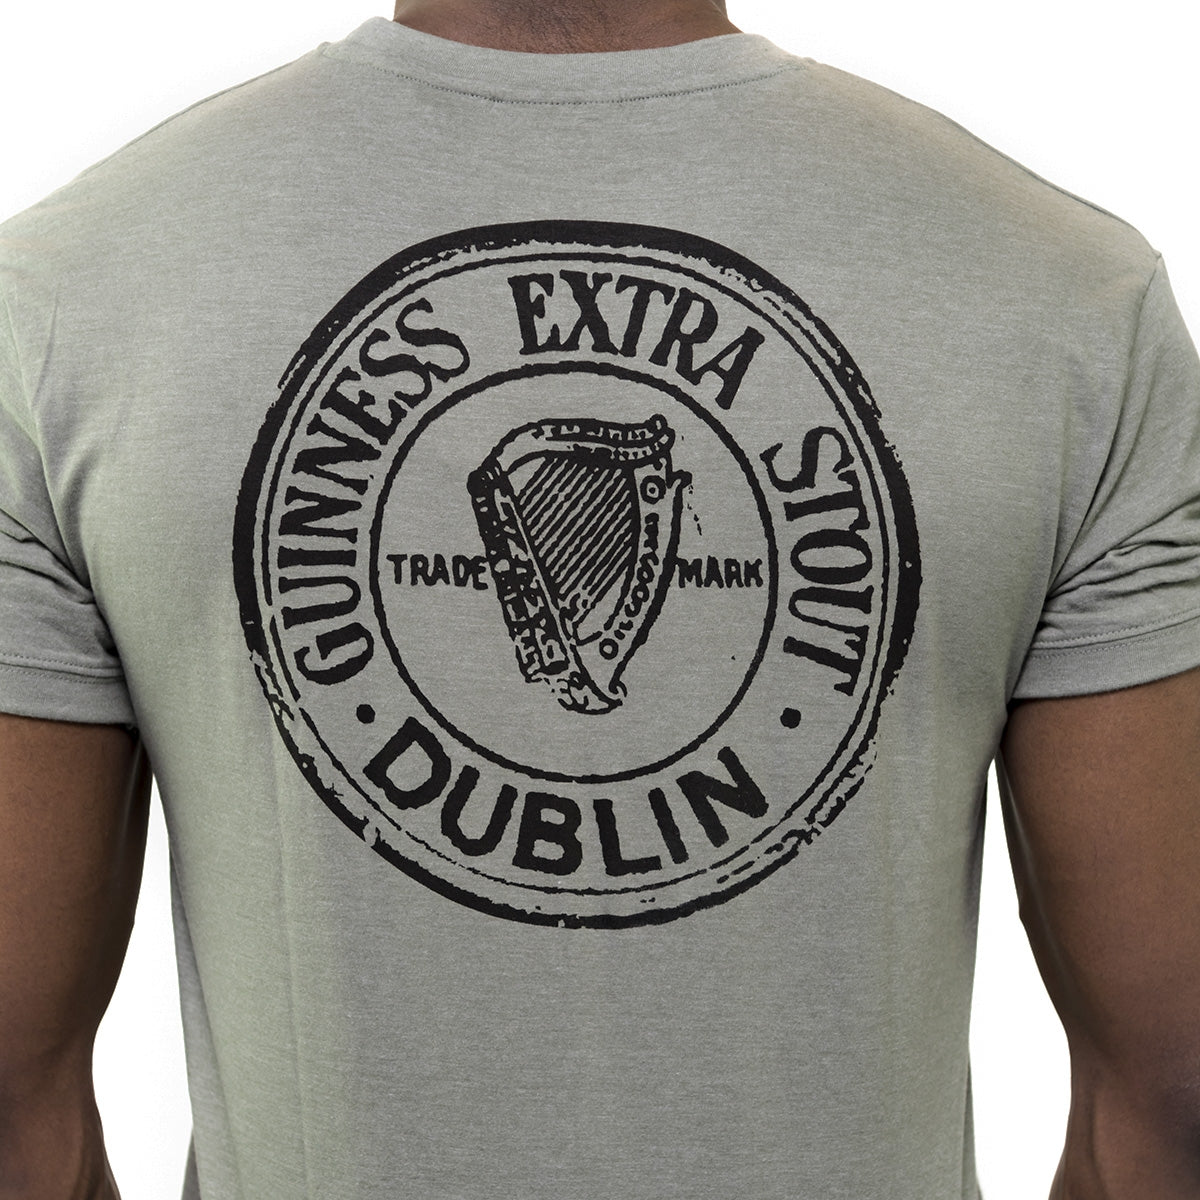 The back of a man wearing a Green Heathered Bottle Cap Tee from Guinness.